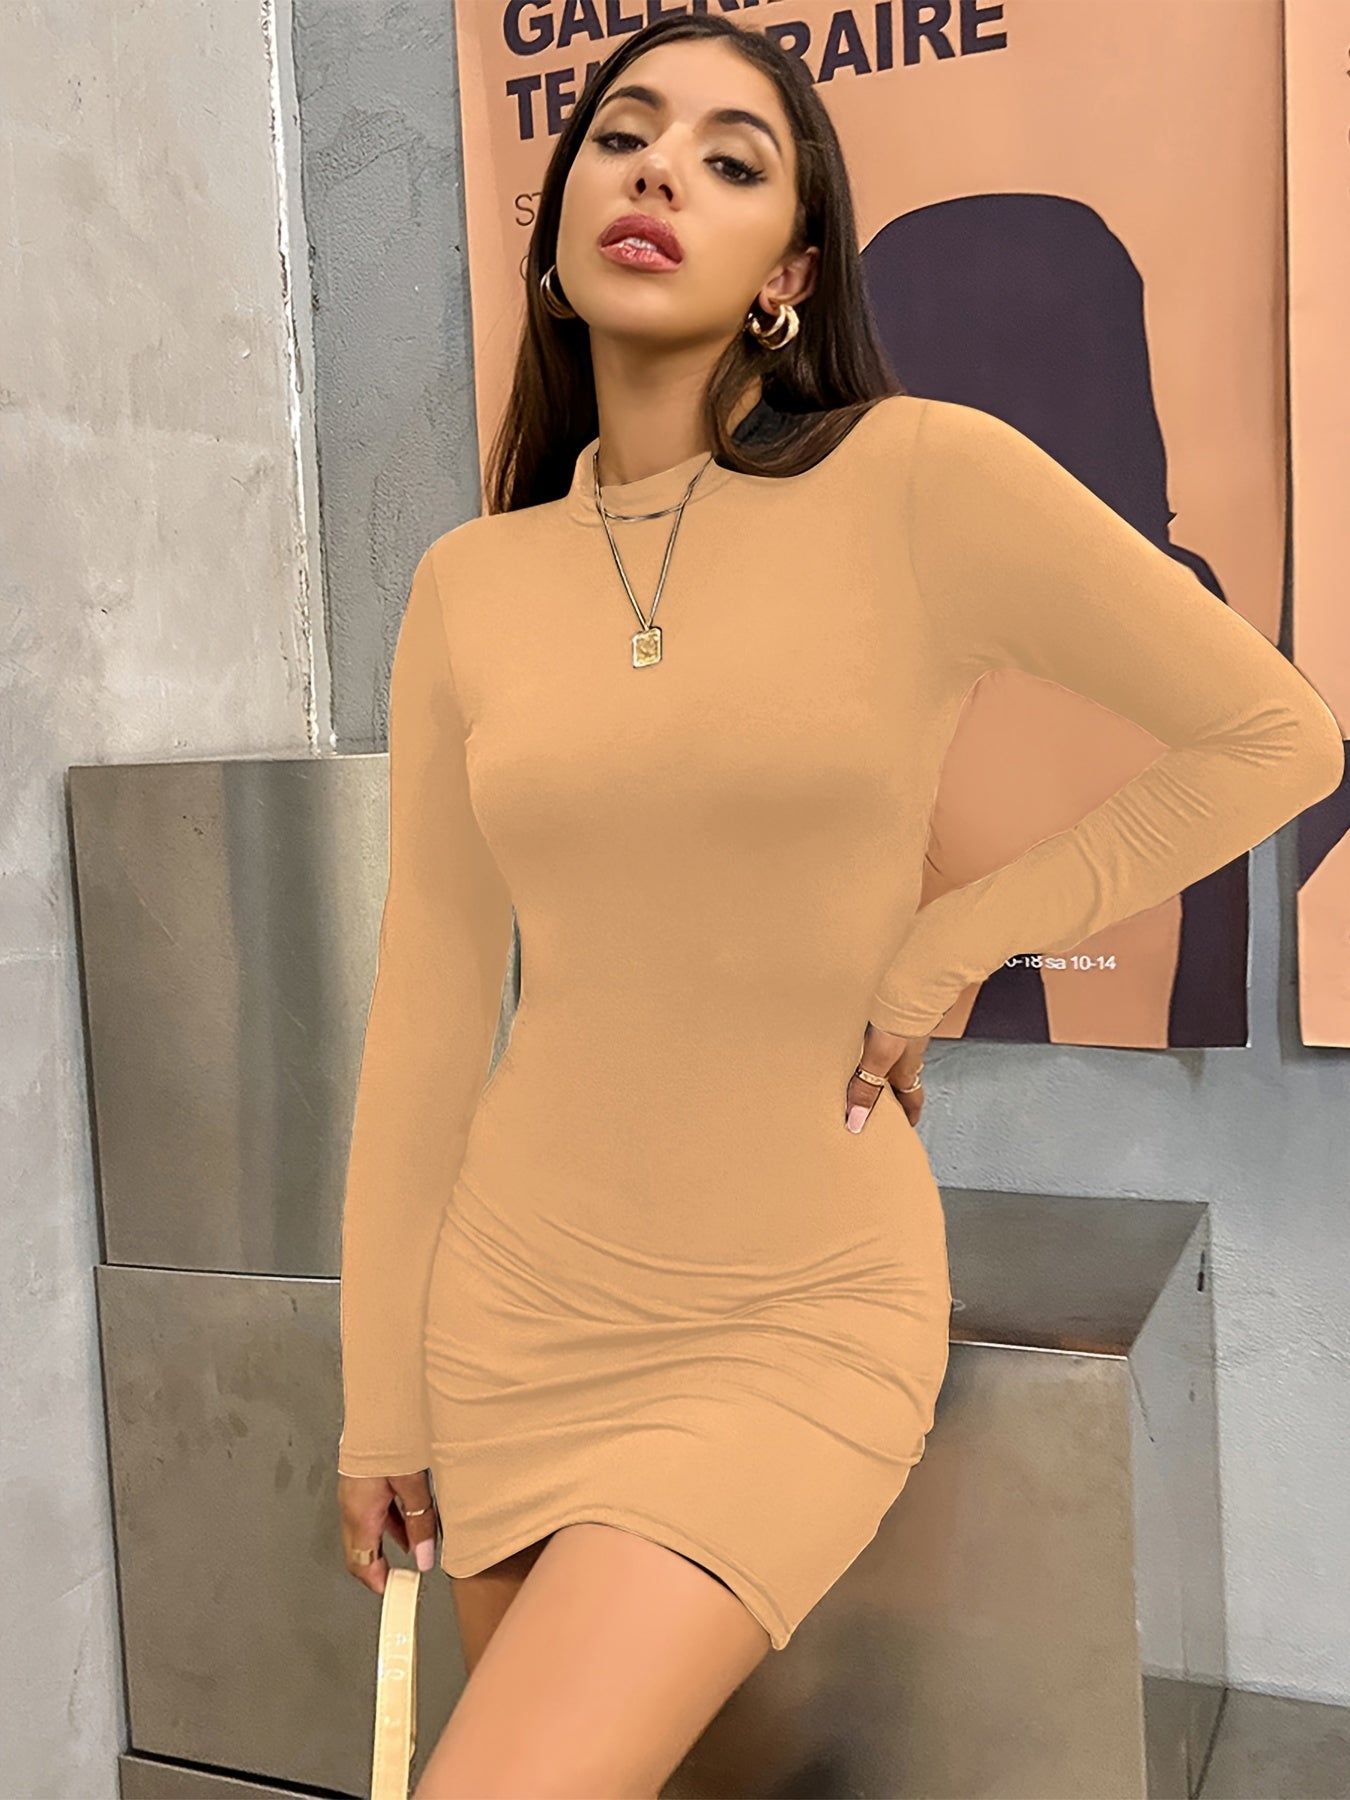 Antmvs Mock Neck Bodycon Dress, Sexy Long Sleeve Dress For Spring & Fall, Women's Clothing